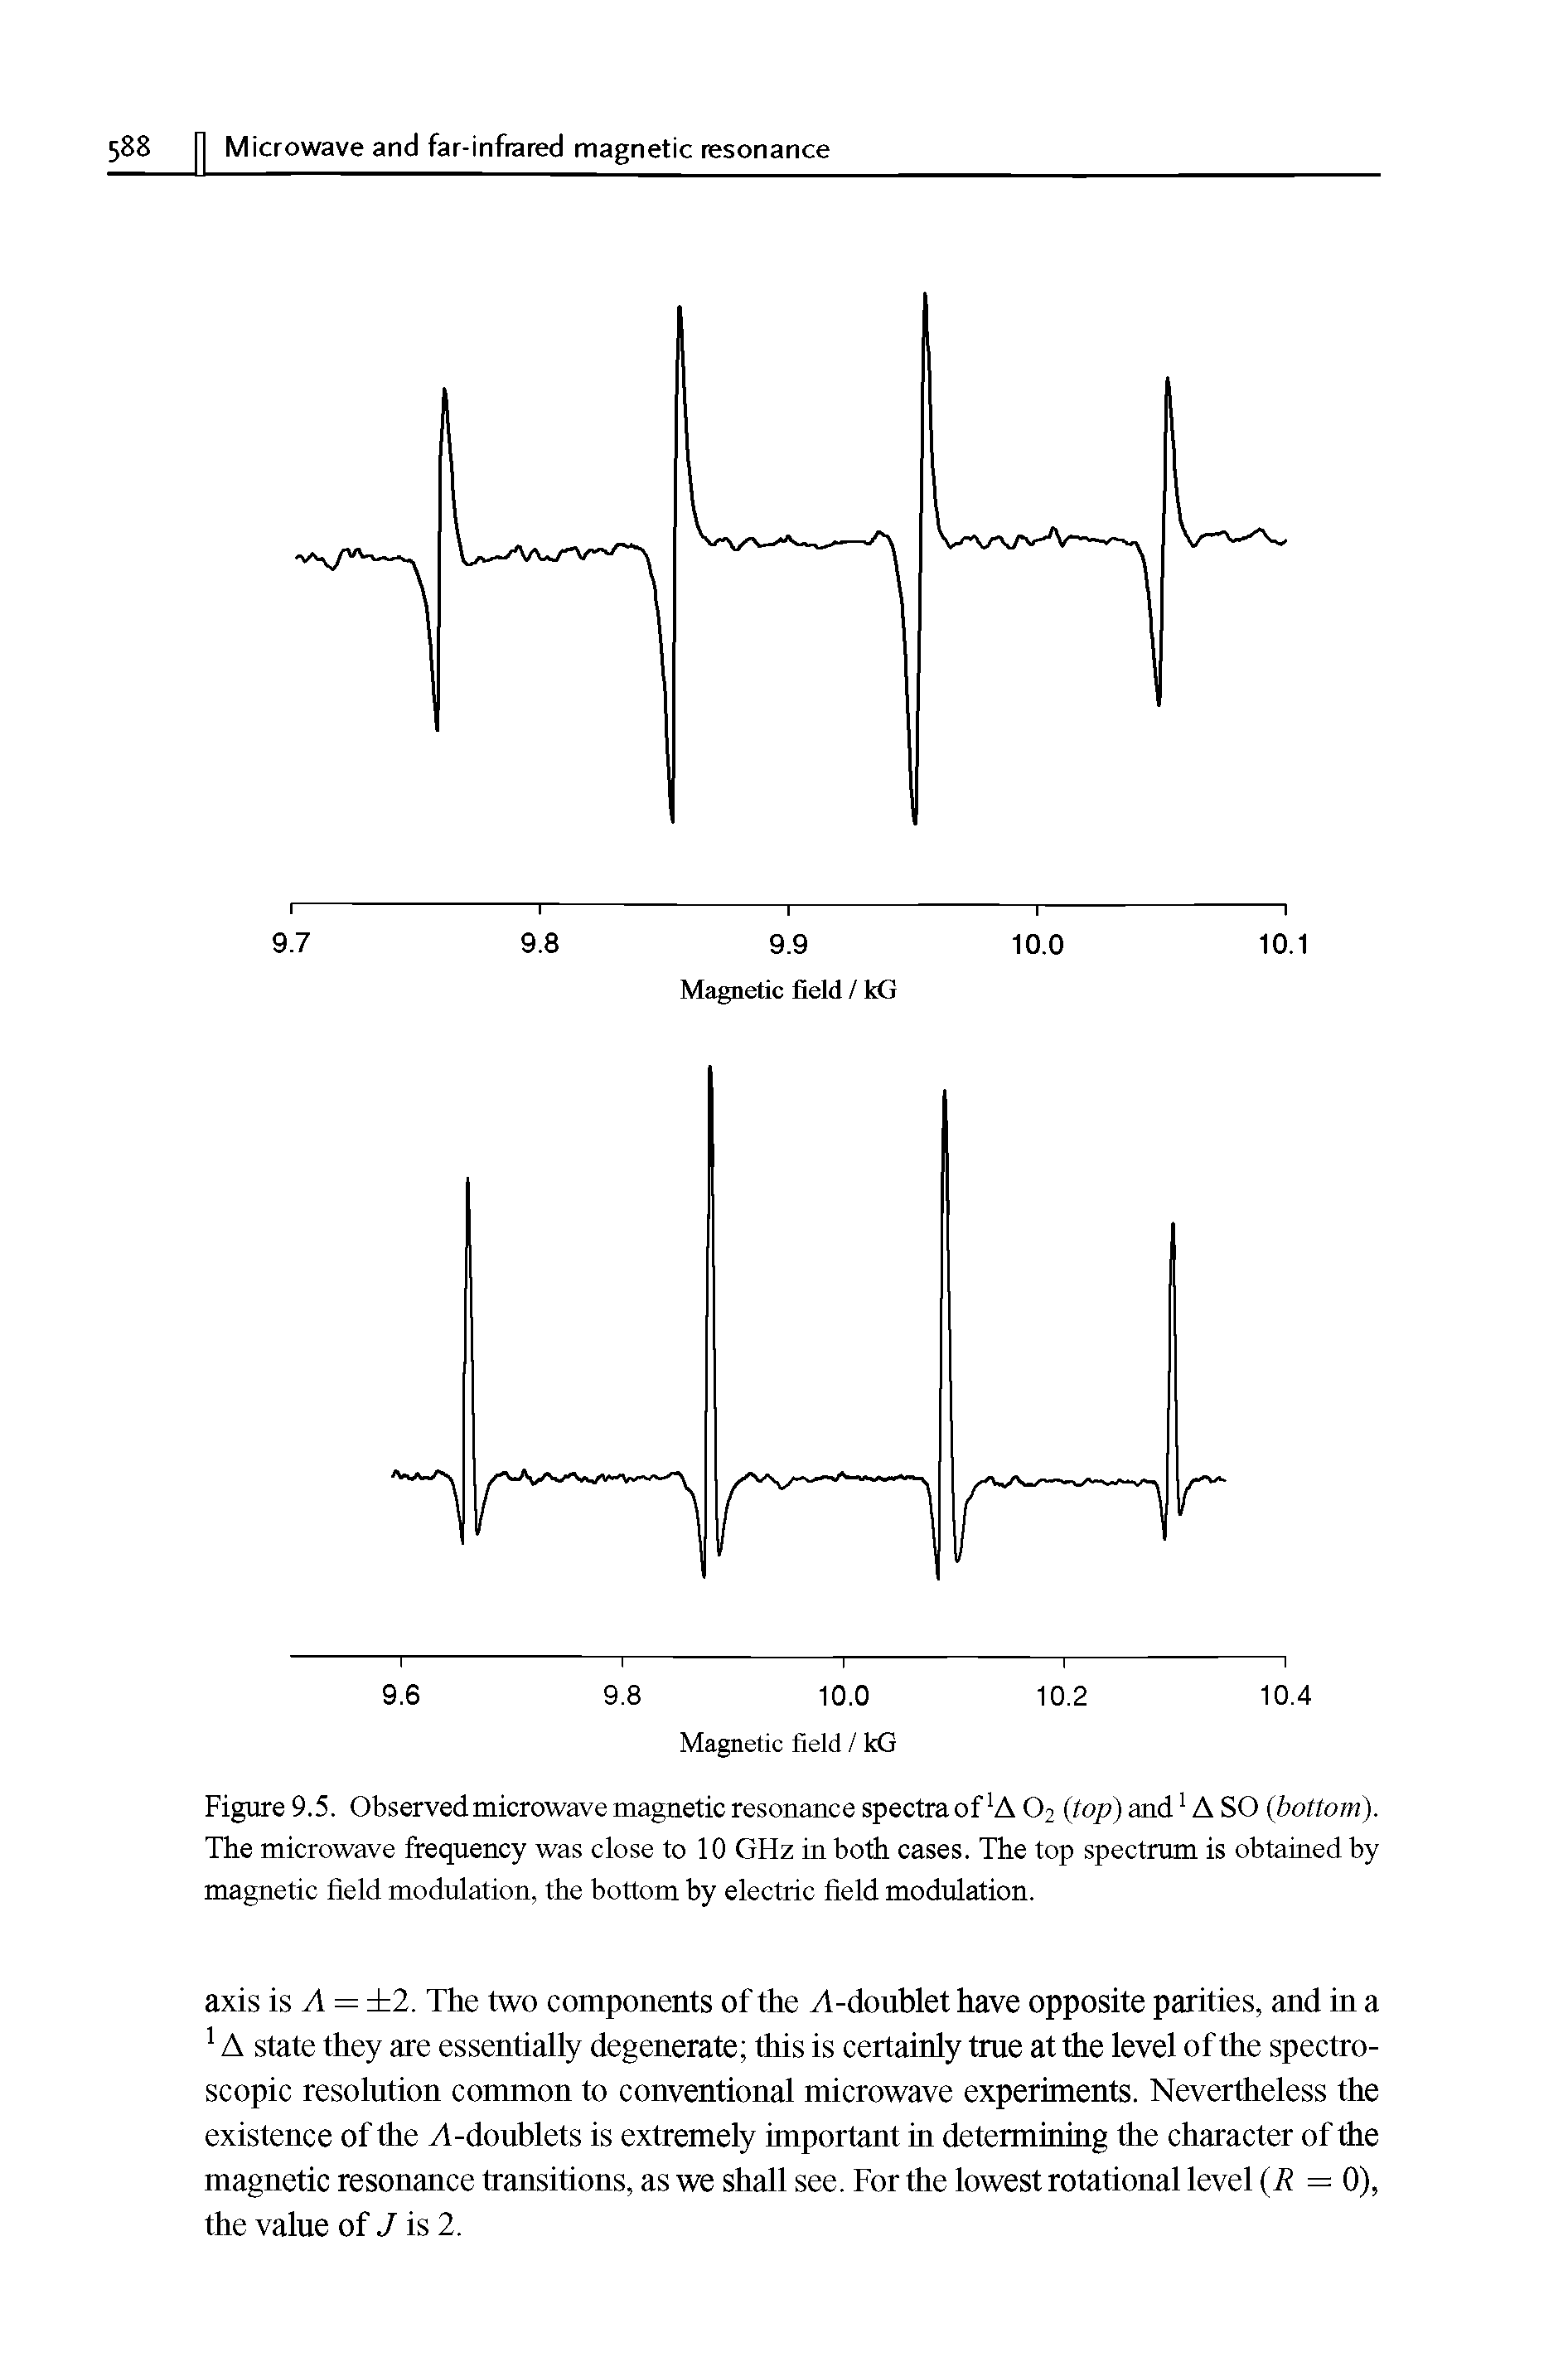 Figure 9.5. Observed microwave magnetic resonance spectra of A 02 (top) and1A SO (bottom). The microwave frequency was close to 10 GHz in both cases. The top spectrum is obtained by magnetic field modulation, the bottom by electric field modulation.